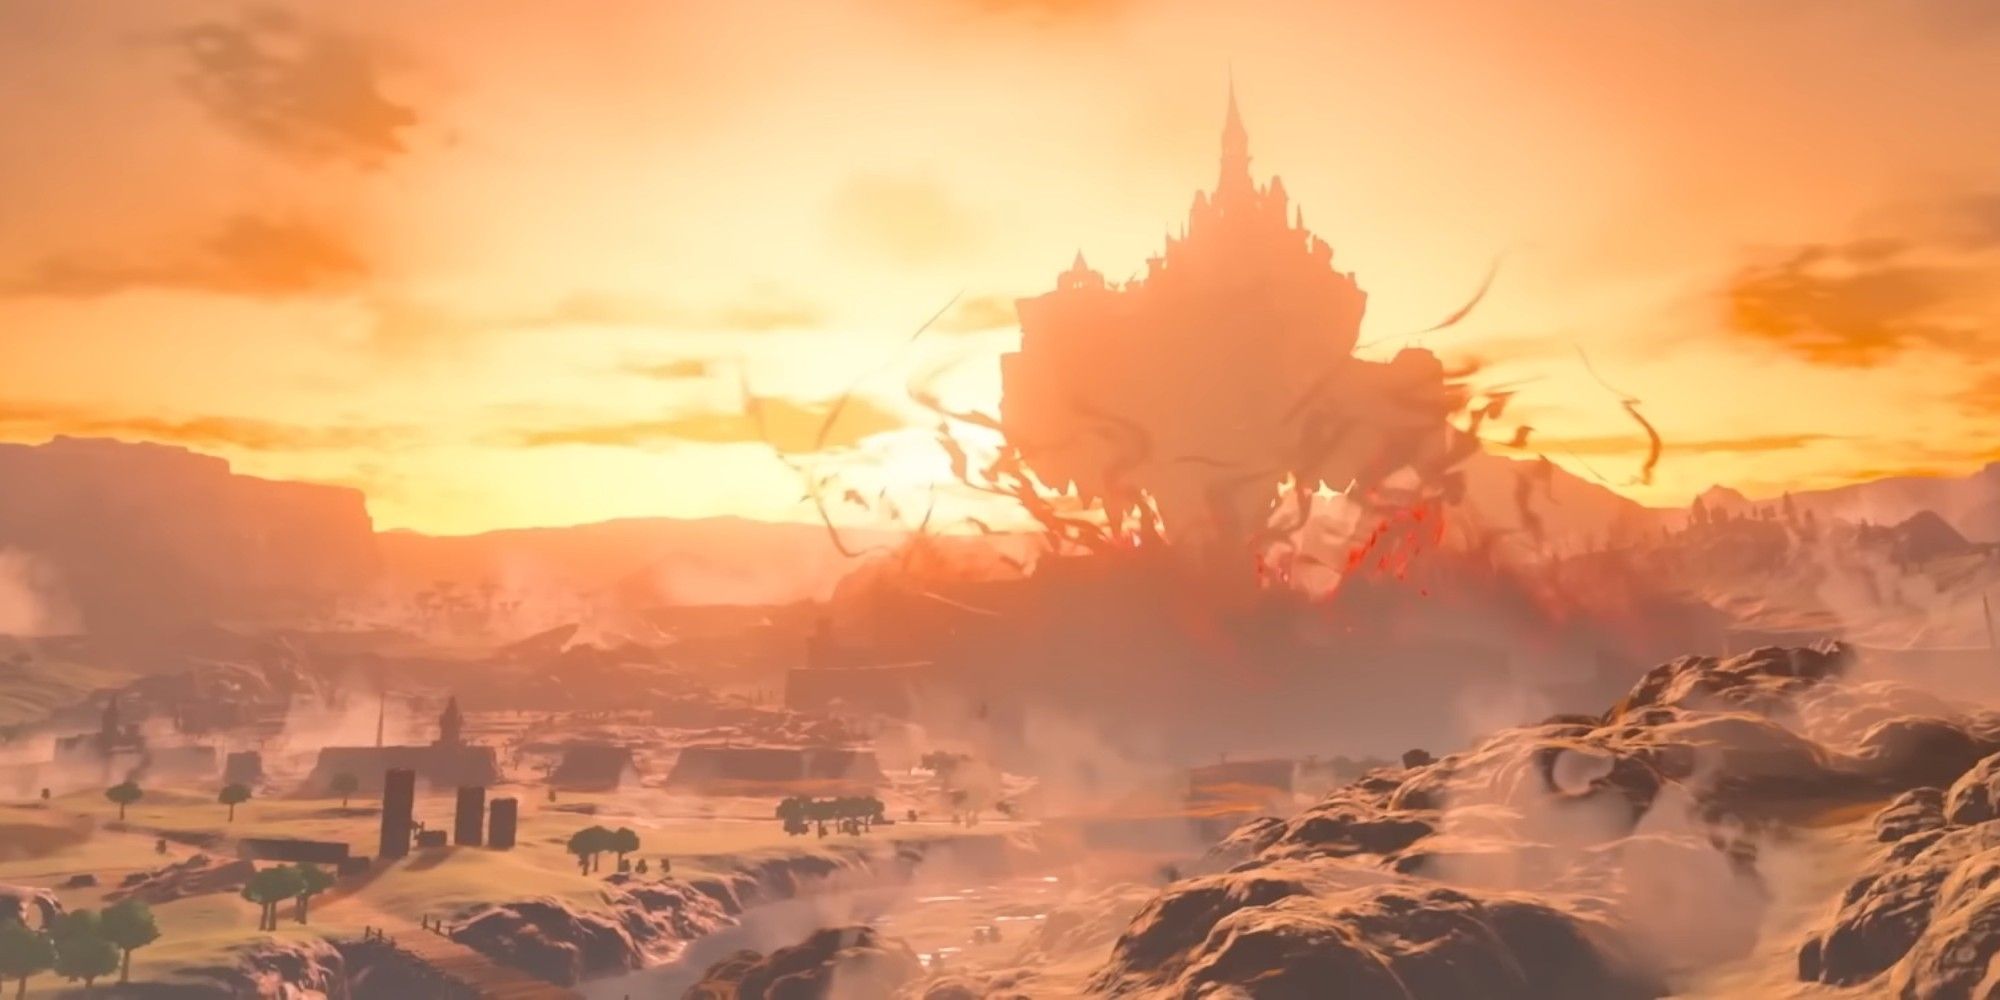 Hyrule Castle as seen in Tears of the Kingdom's original announcement trailer, floating above the surrounding Hyrule Field apparently under the power of Ganon's Malice.